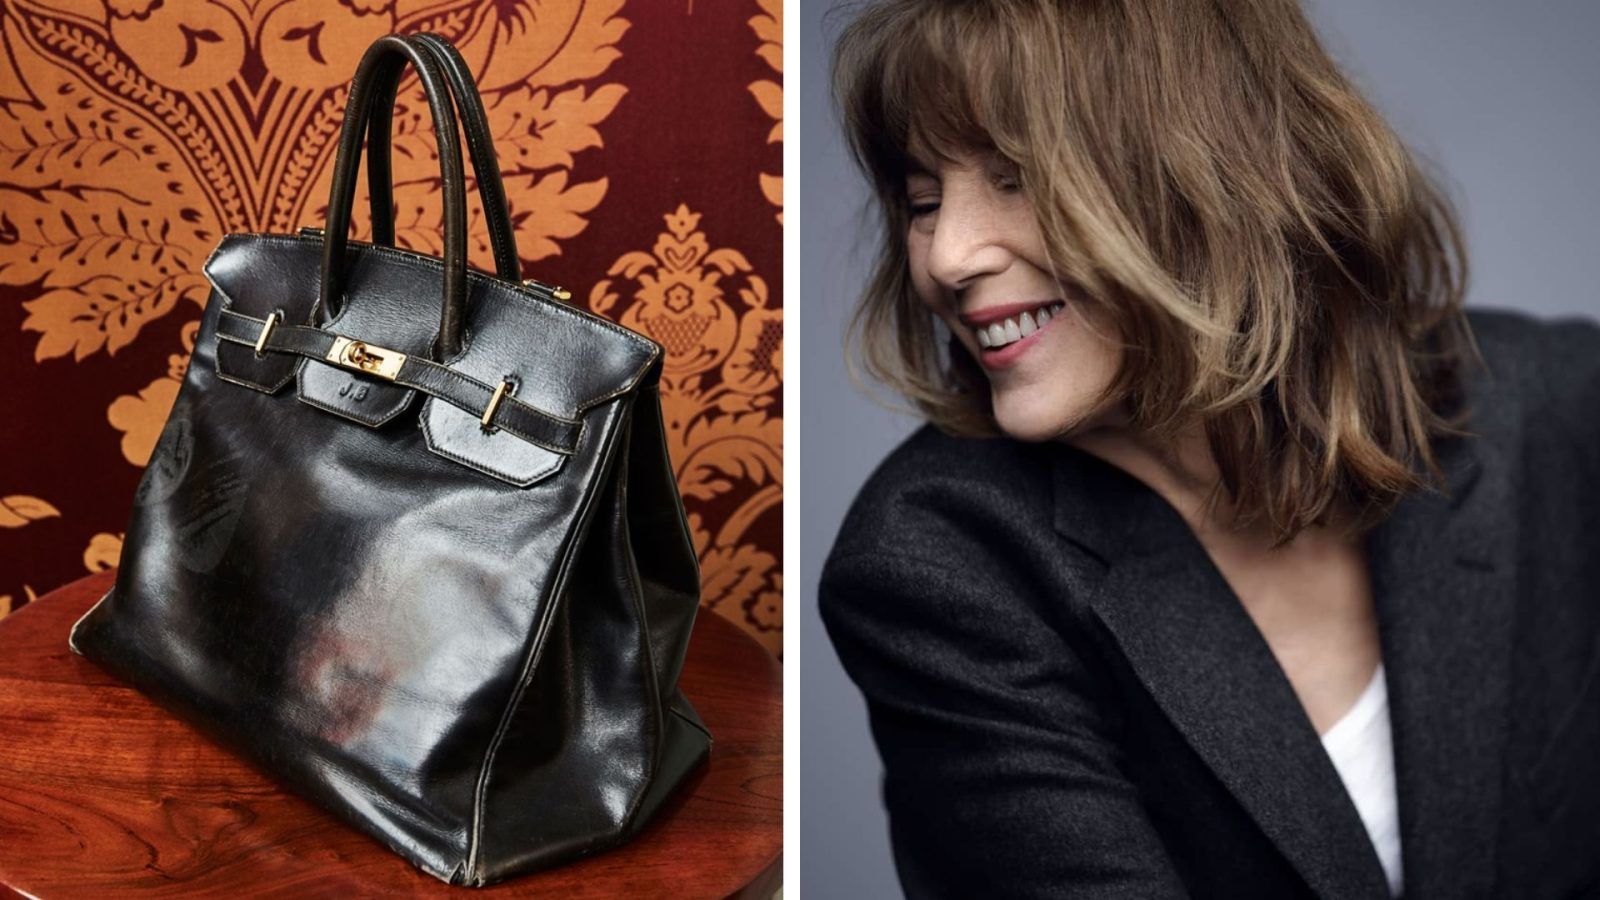 The 30cm Himalayan Birkin: One Of The Most Coveted And Rare Bags